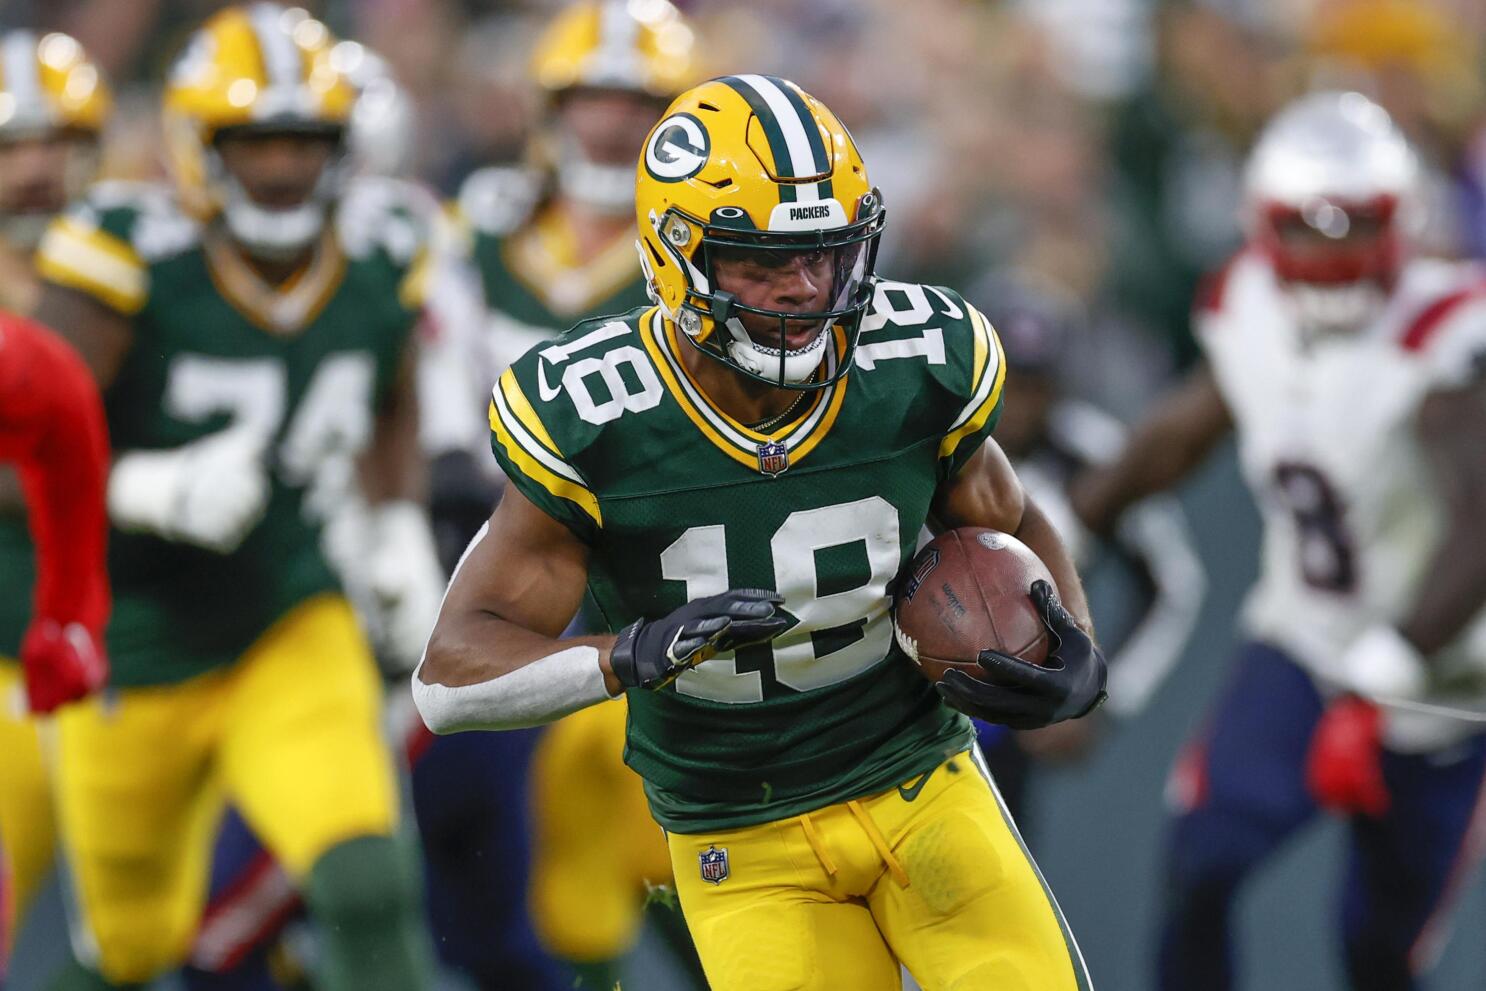 Jets sign former Packers WR Cobb to join buddy Rodgers in NY